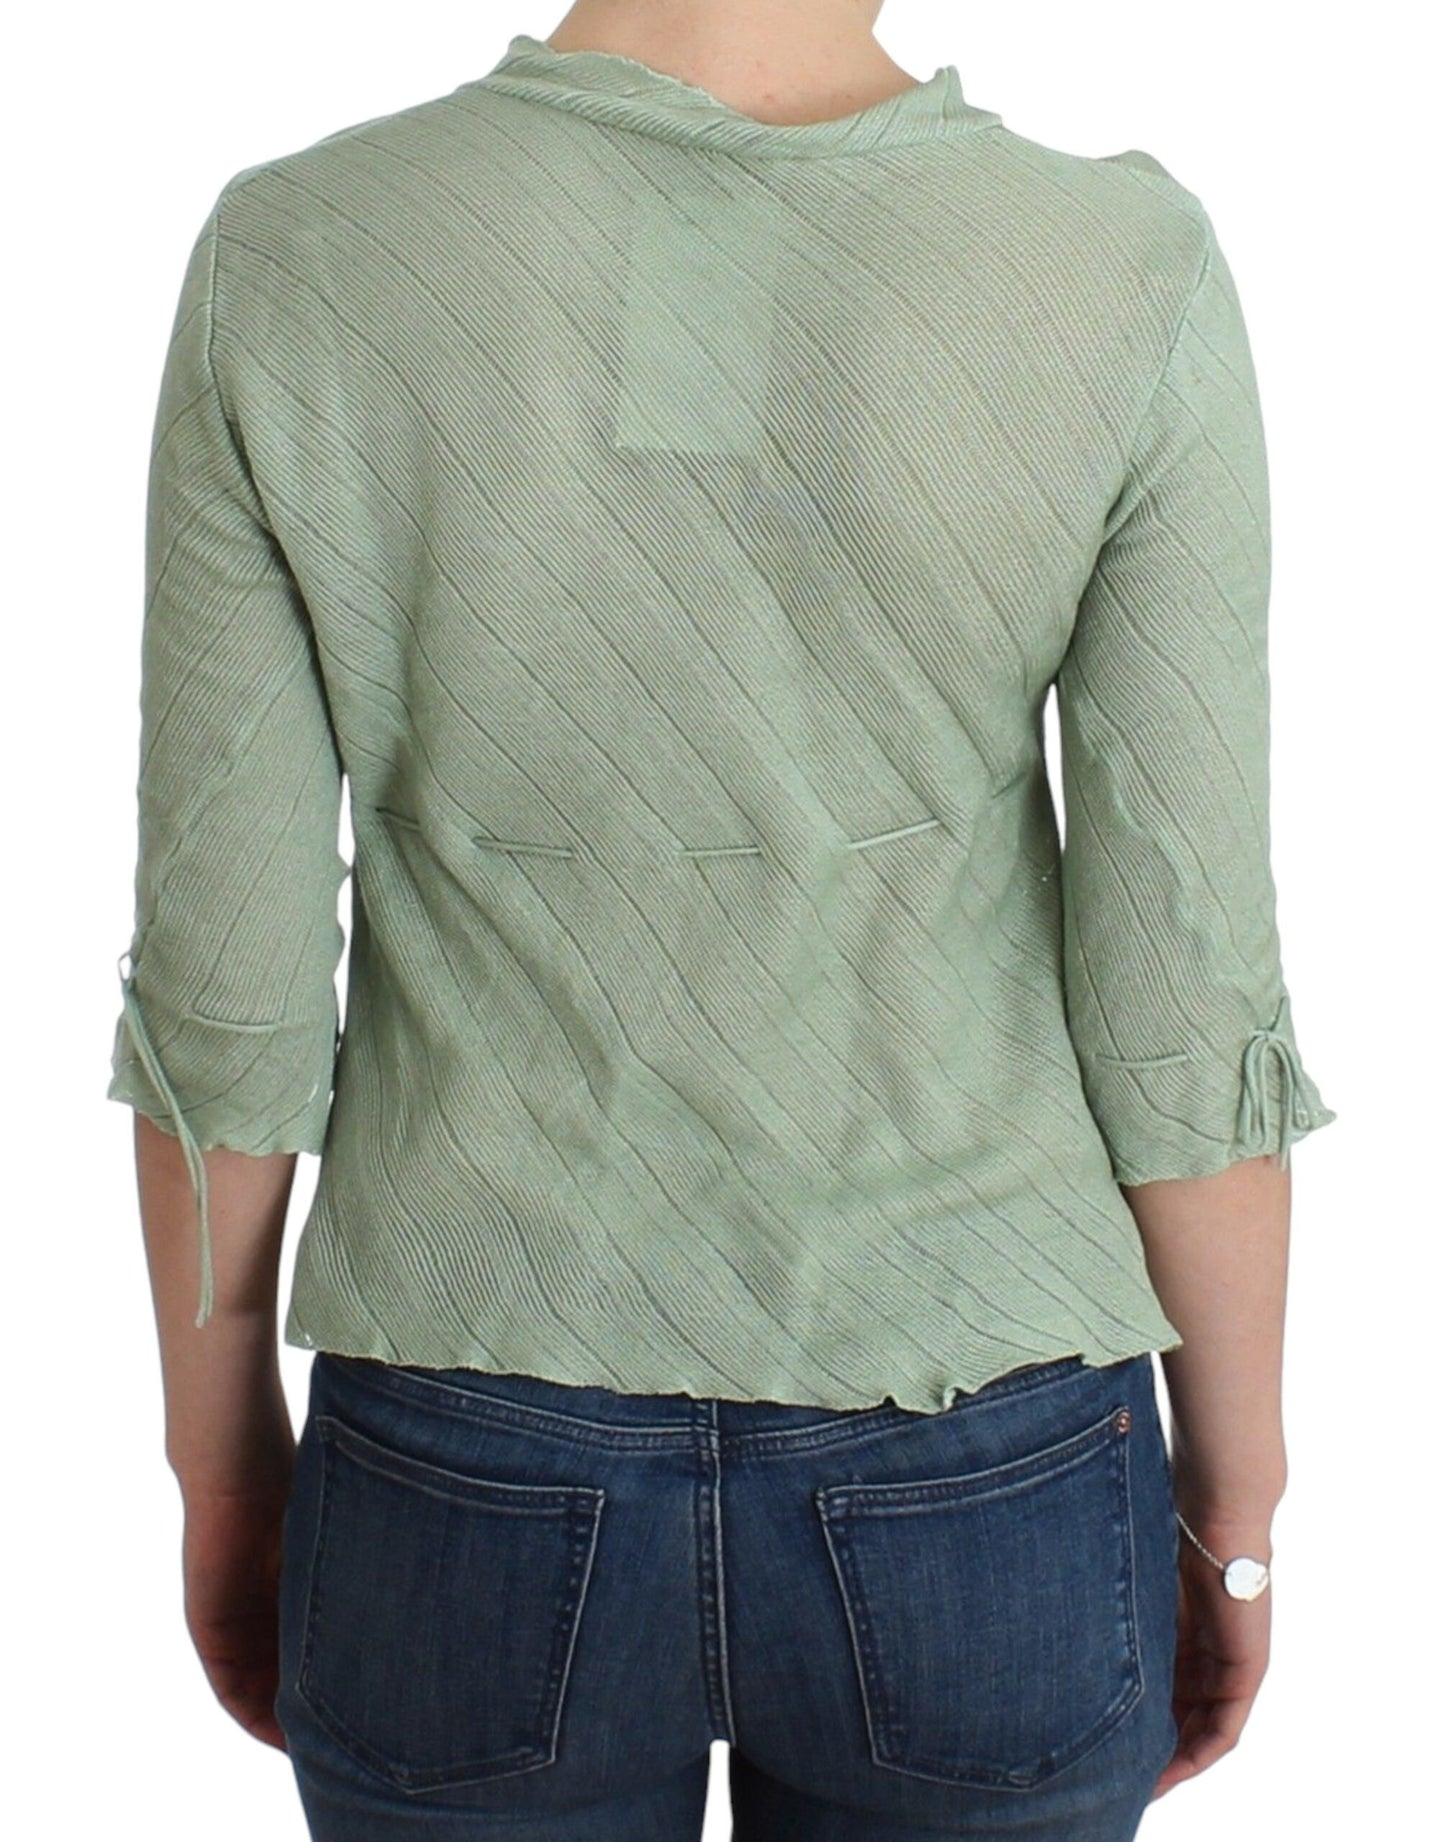 Chic Green Knitted Top – Ethereal Elegance